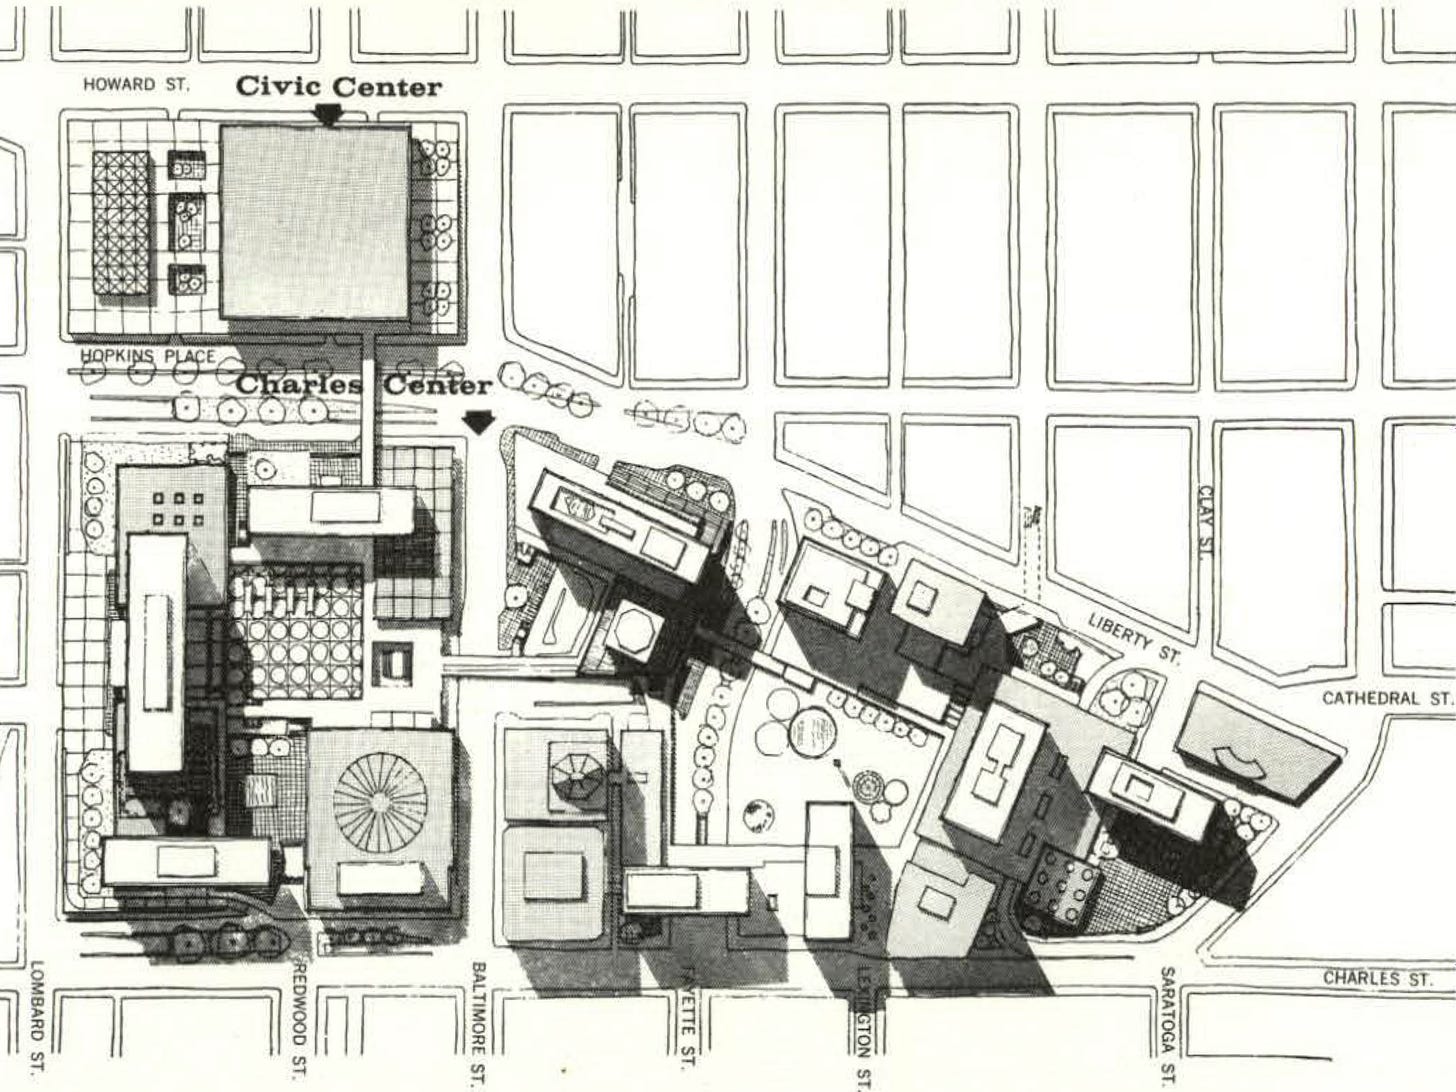 A scanned black and gray map depicting the Charles Center development in downtown Baltimore.